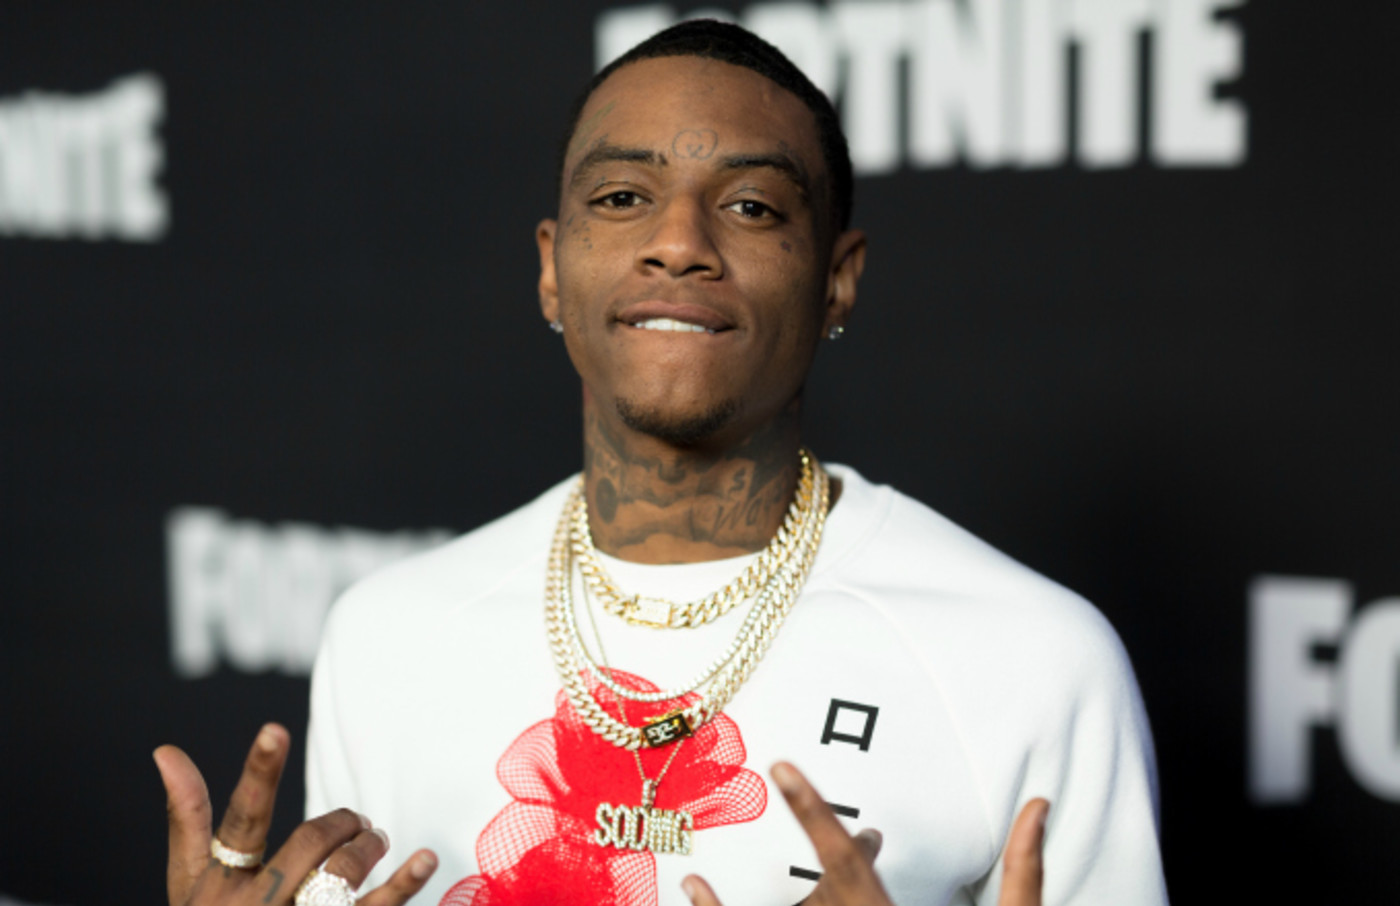 Soulja Boy Reportedly Kicks Friends out of Home After Release From Jail